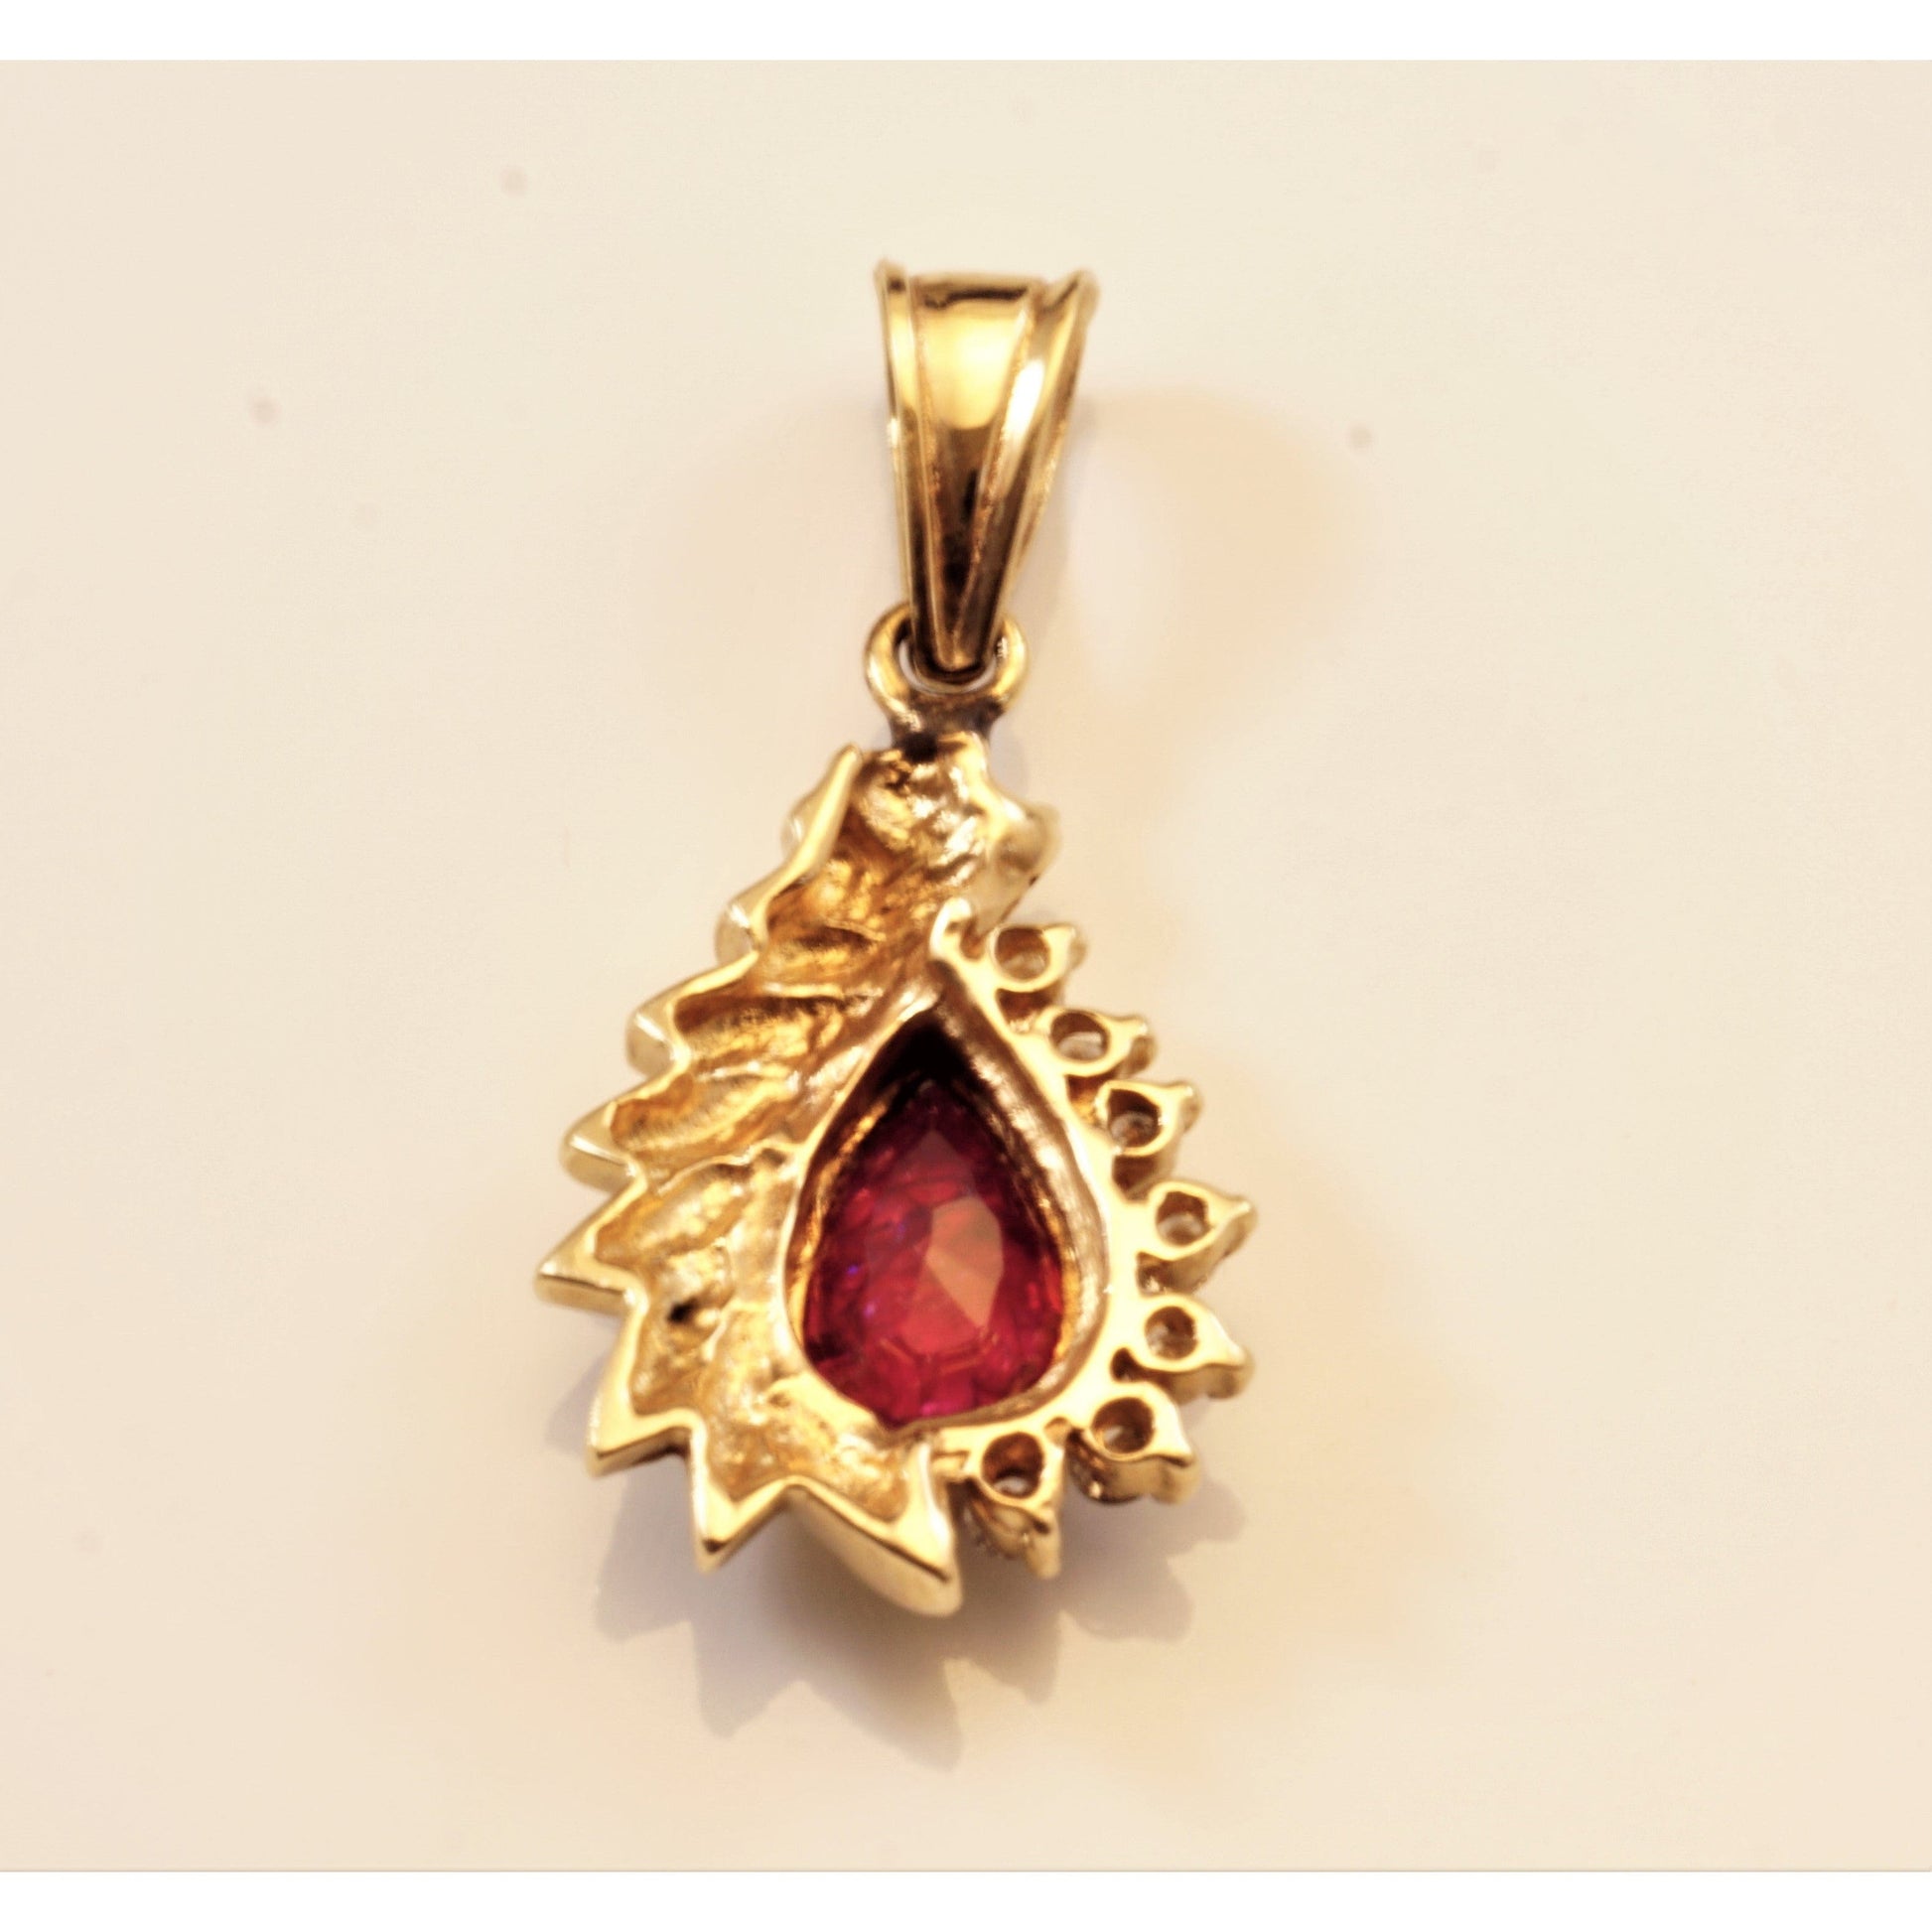 FJL Jewelry Pendants, Stones & Charms Teardrop 1.80ct Ruby Pendant in 14K Yellow Gold w/ Diamond and Wing Design